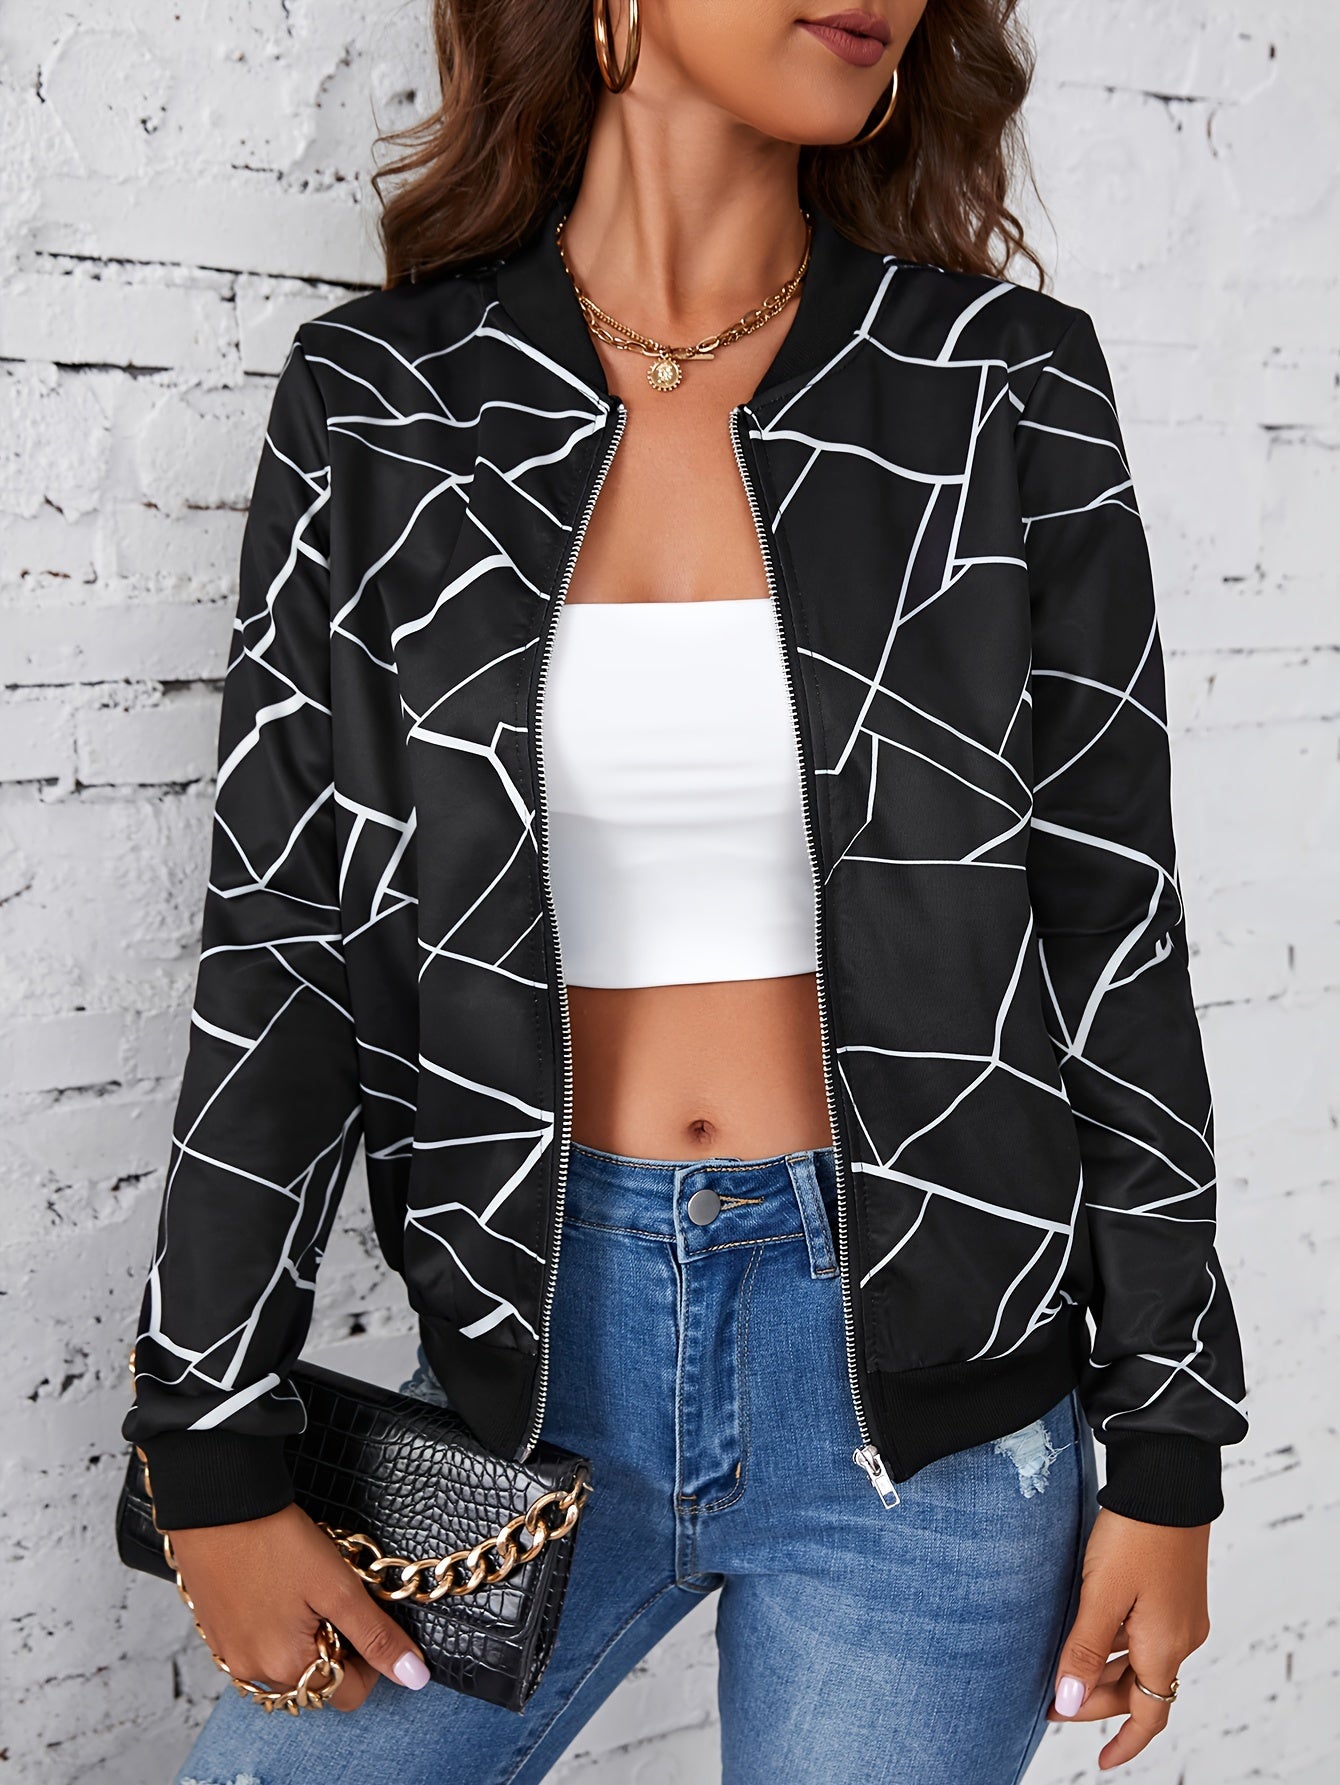 Antmvs Geo Print Zipper Front Jacket, Casual Long Sleeve Jacket For Spring & Fall, Women's Clothing